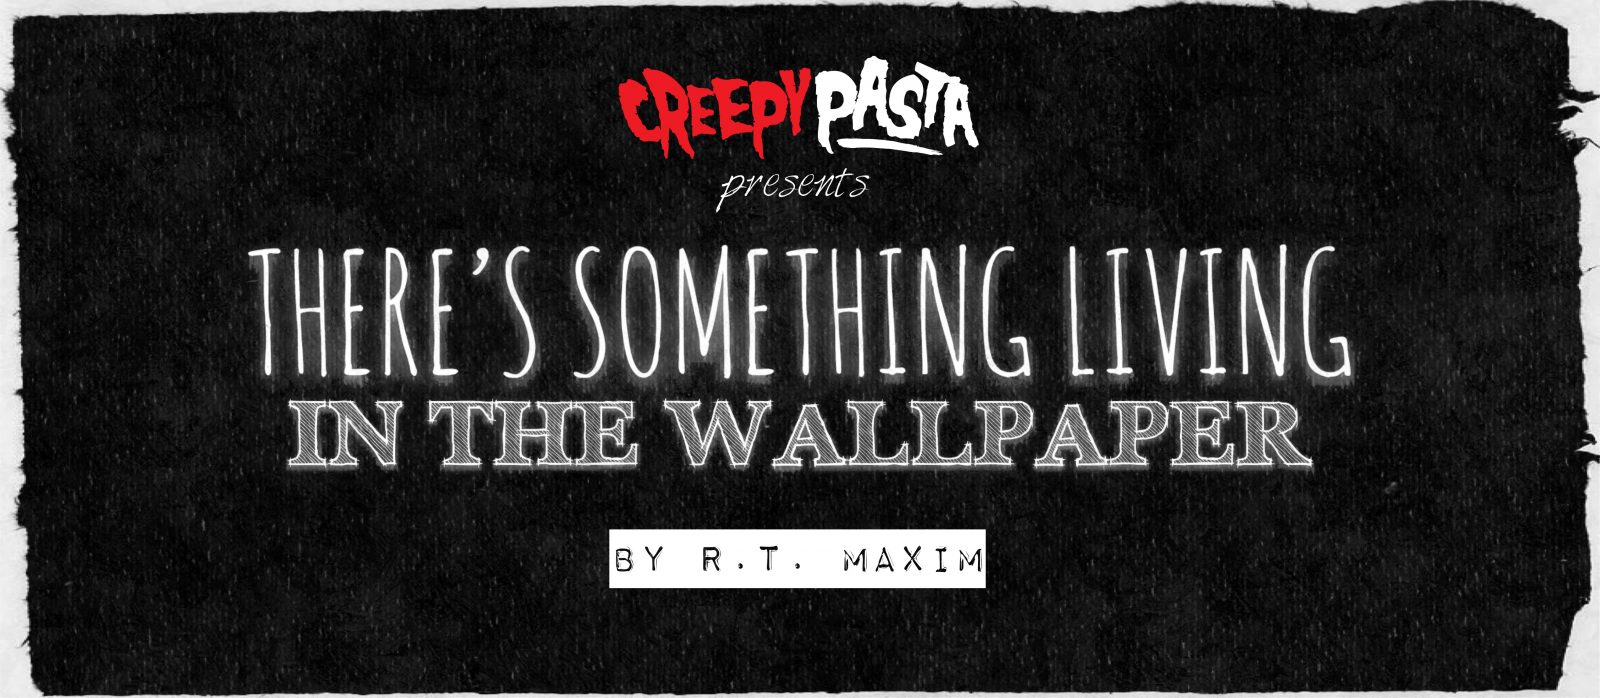 There S Something Living In The Wallpaper - Darkness - HD Wallpaper 